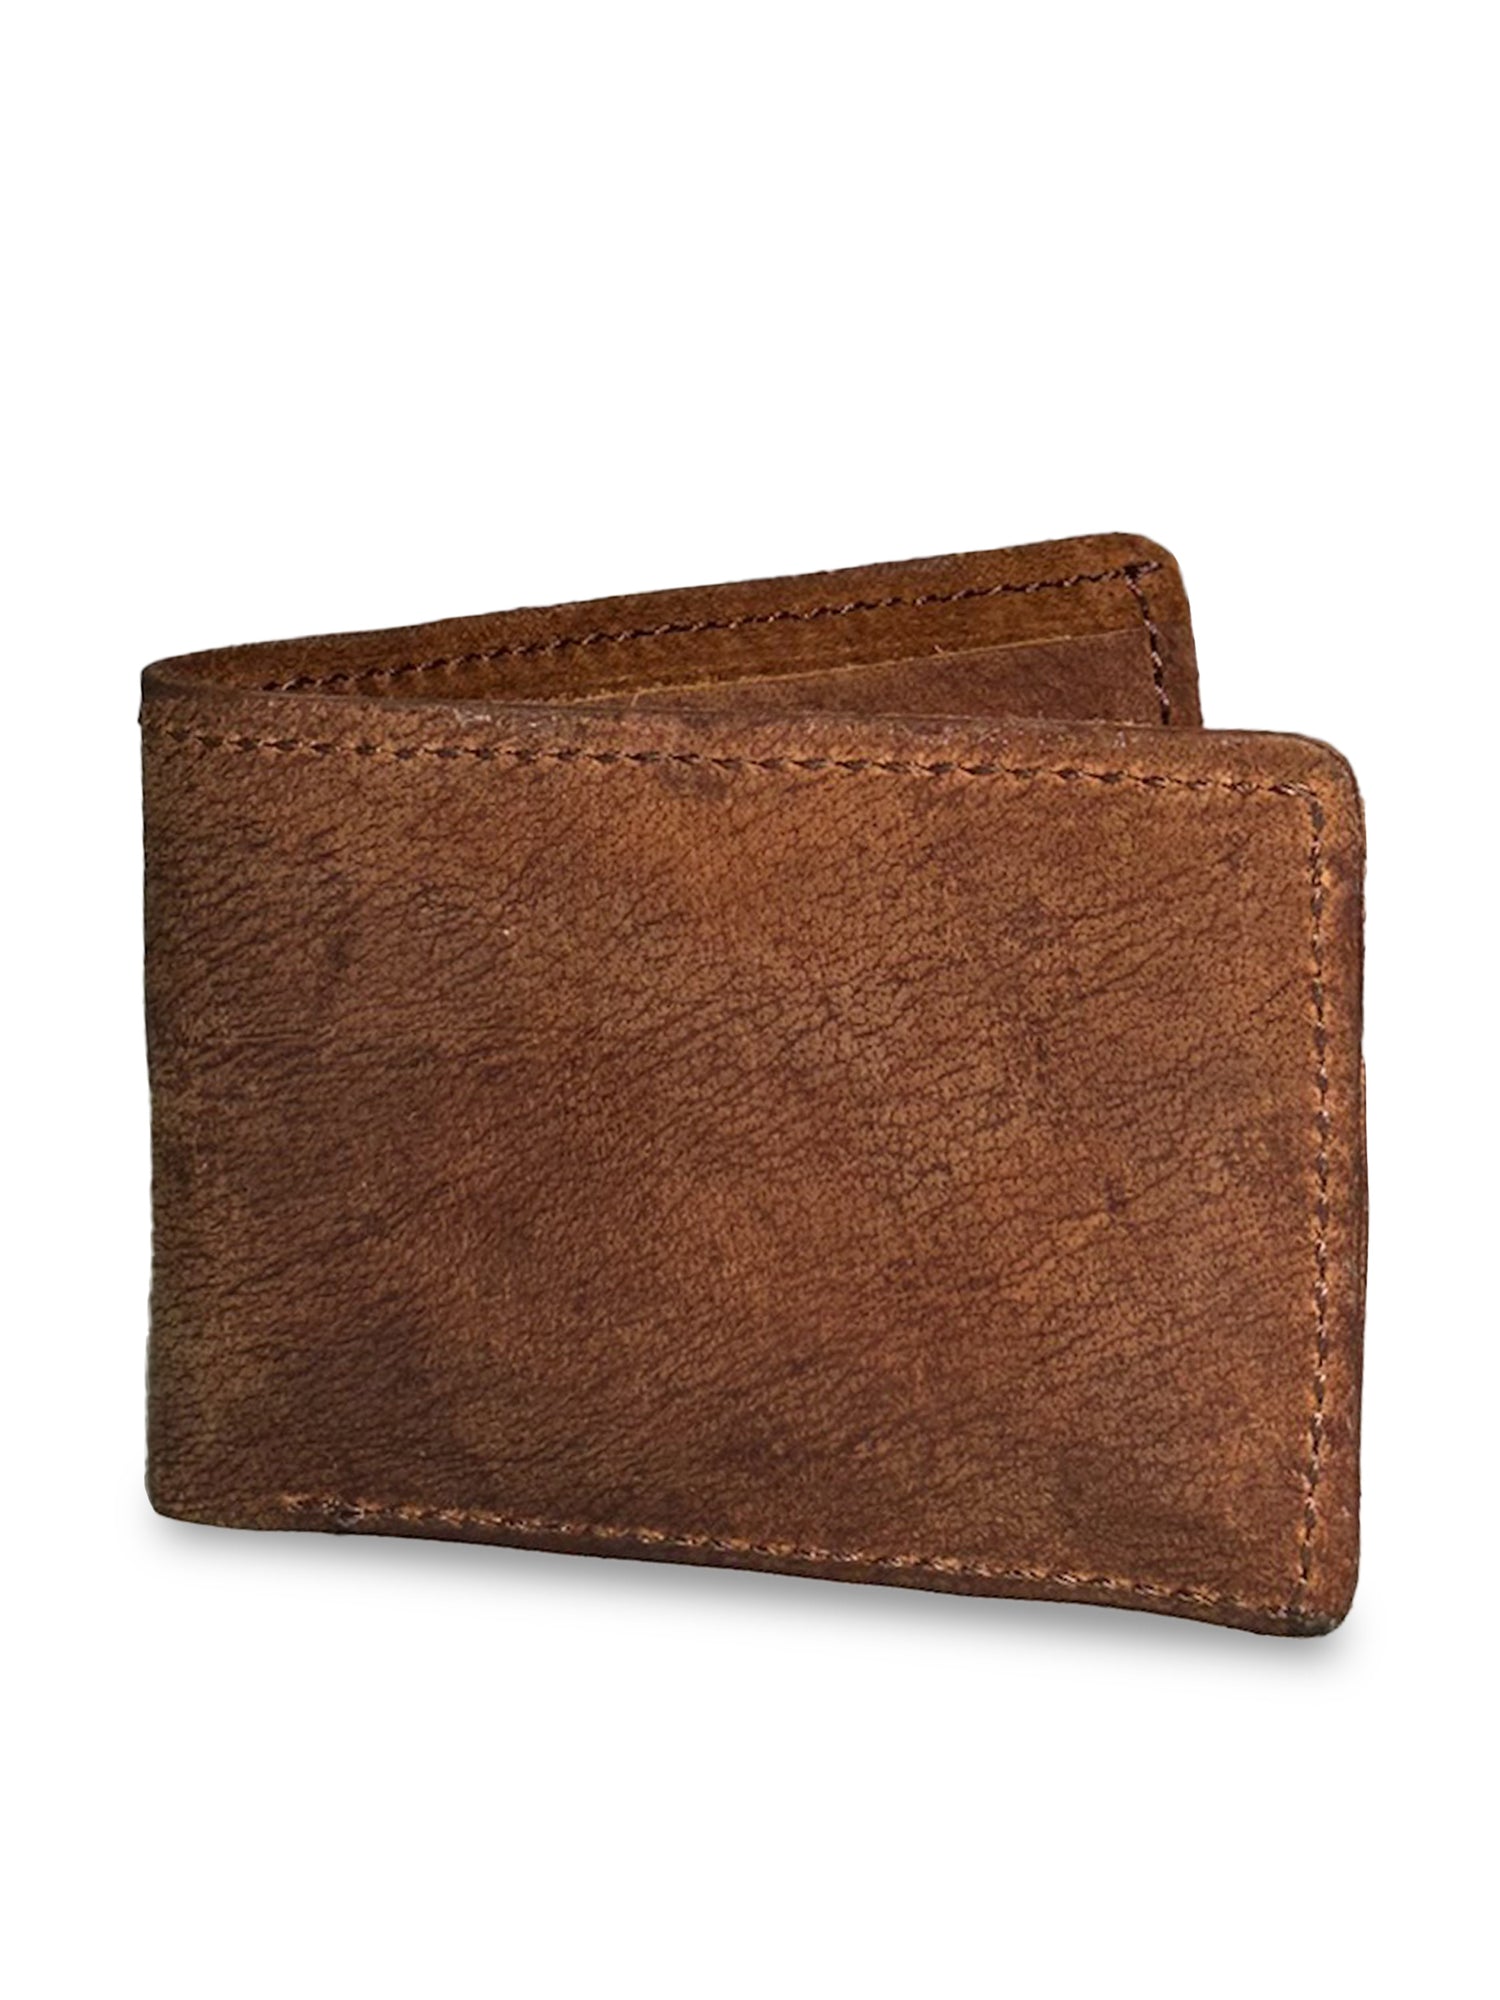 Special Edition Bi-fold Wallet in Rawhide Brown - Limited Run